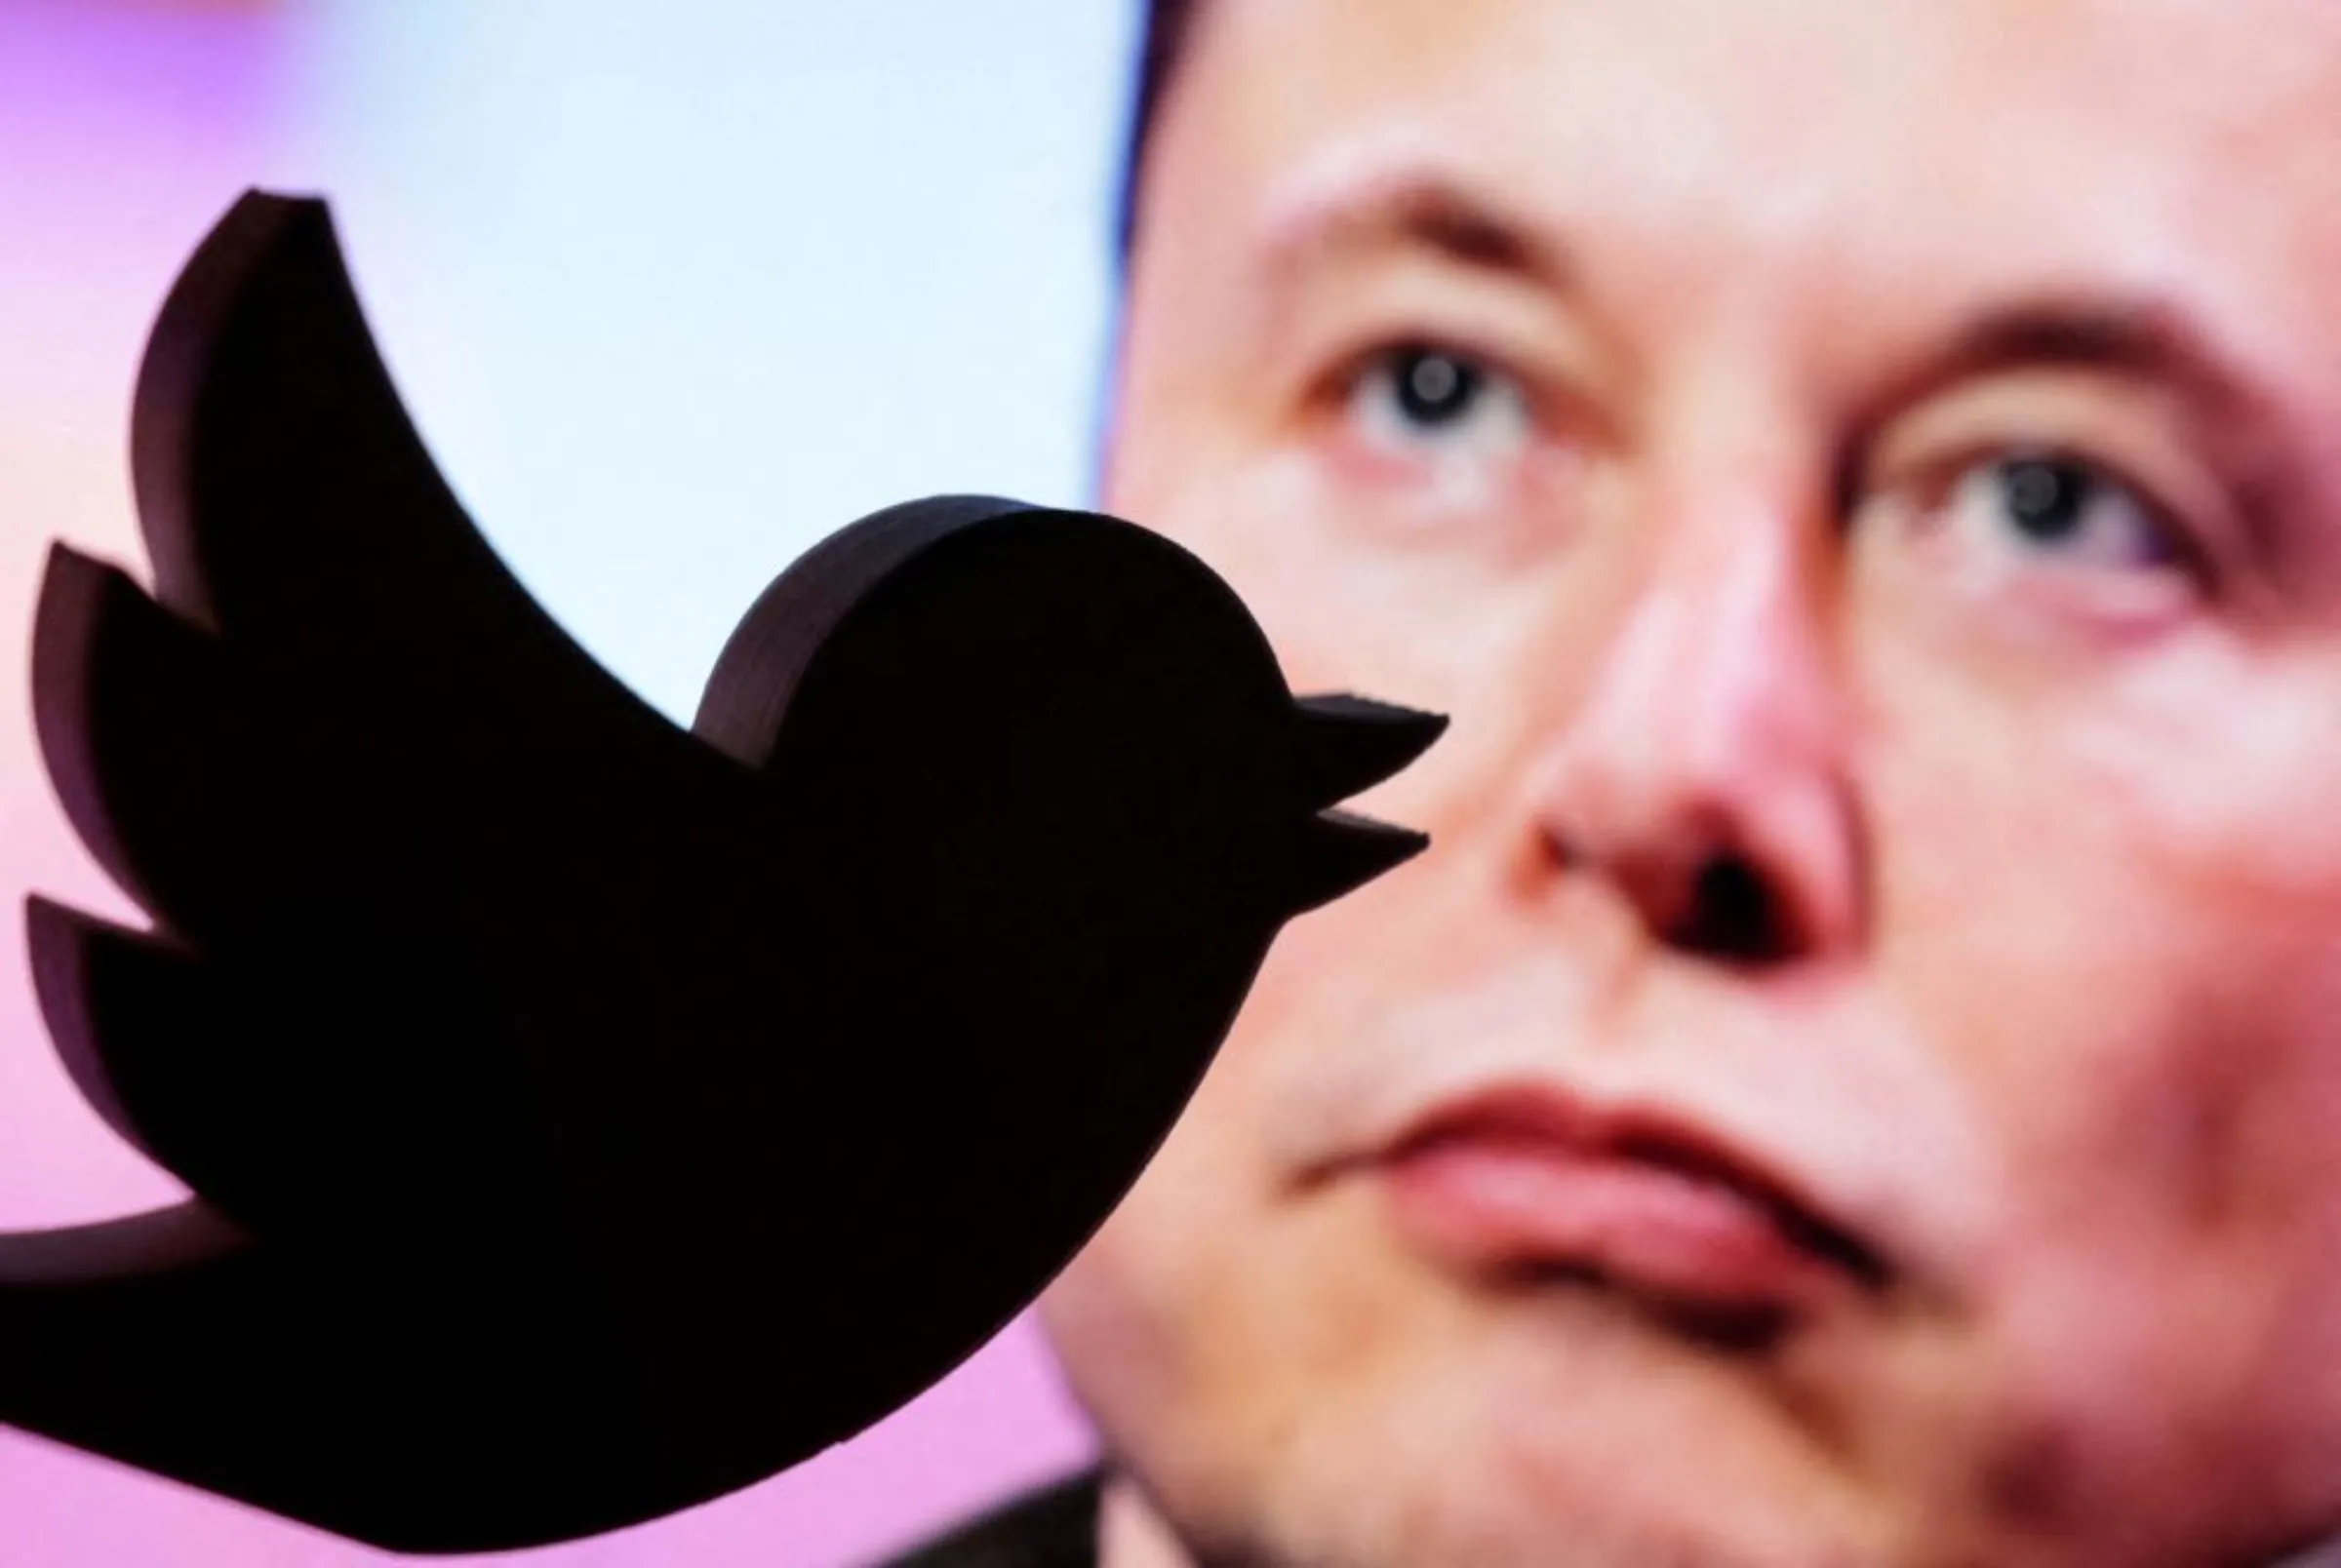 A 3D printed Twitter logo is seen in front of a displayed photo of Elon Musk in this illustration taken October 27, 2022. REUTERS/Dado Ruvic